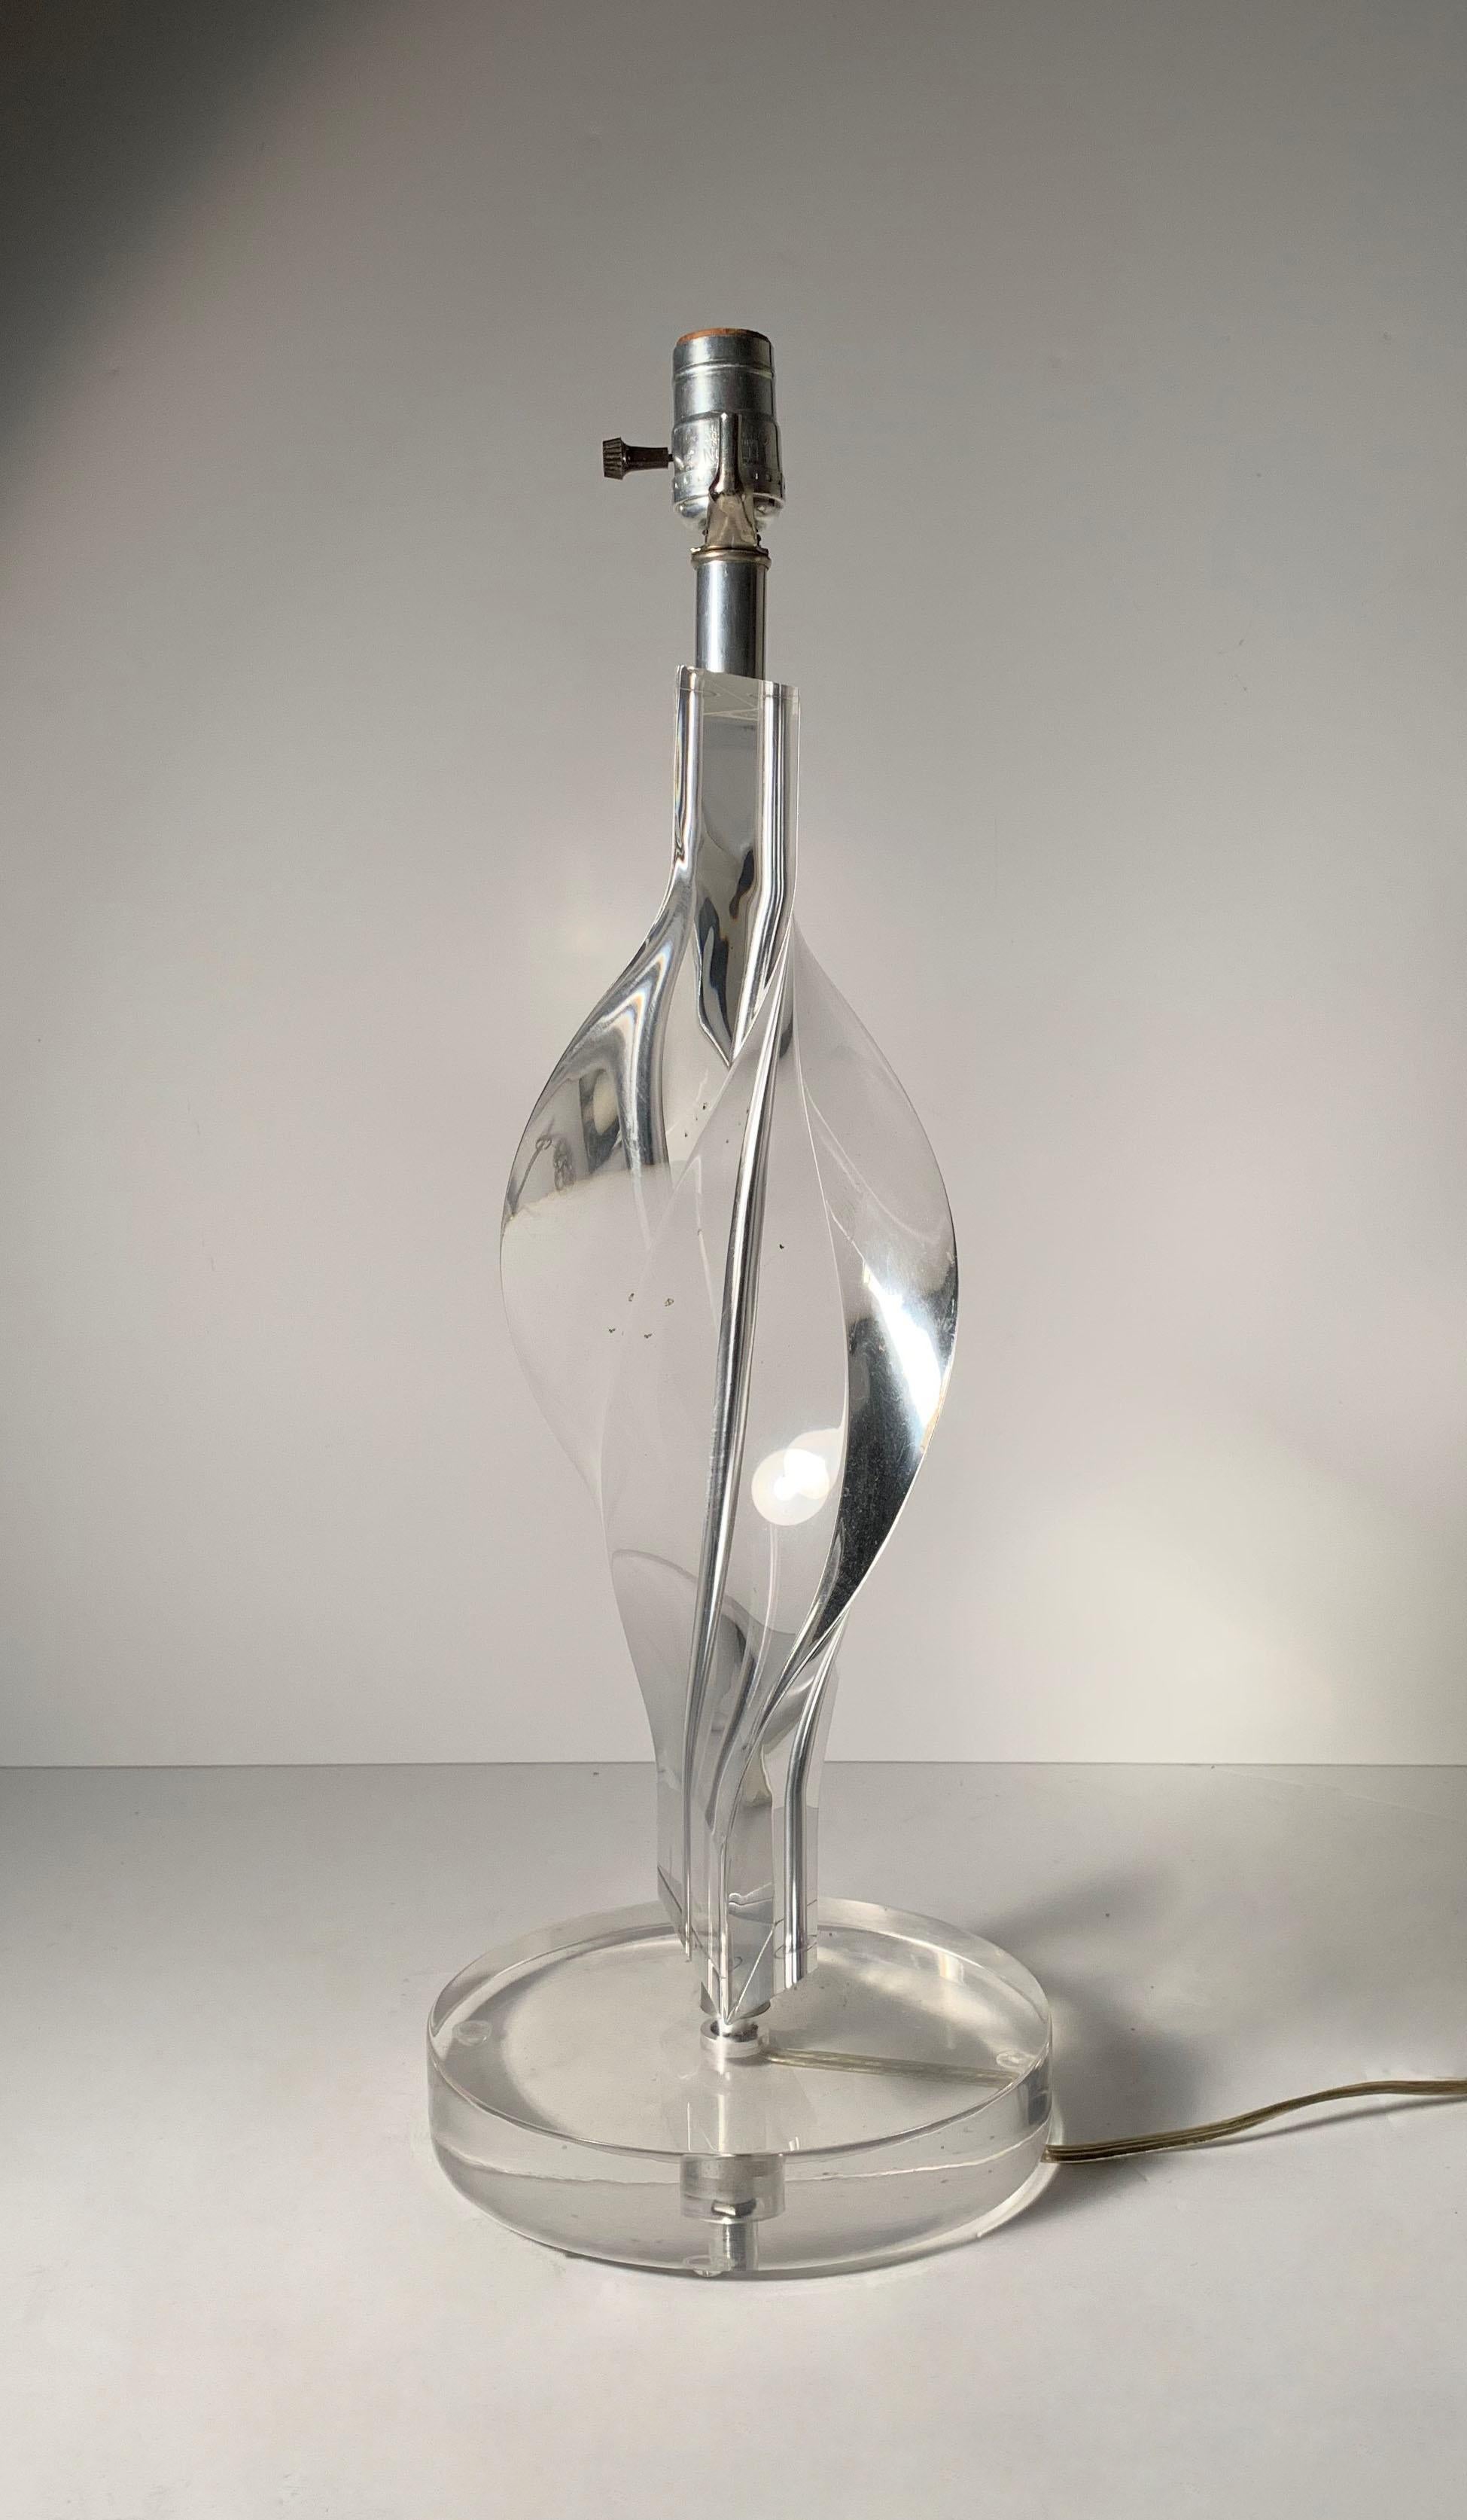 Vintage Lucite Helix Twist Lamp by Herbert Ritts for Astrolite California In Good Condition For Sale In Chicago, IL